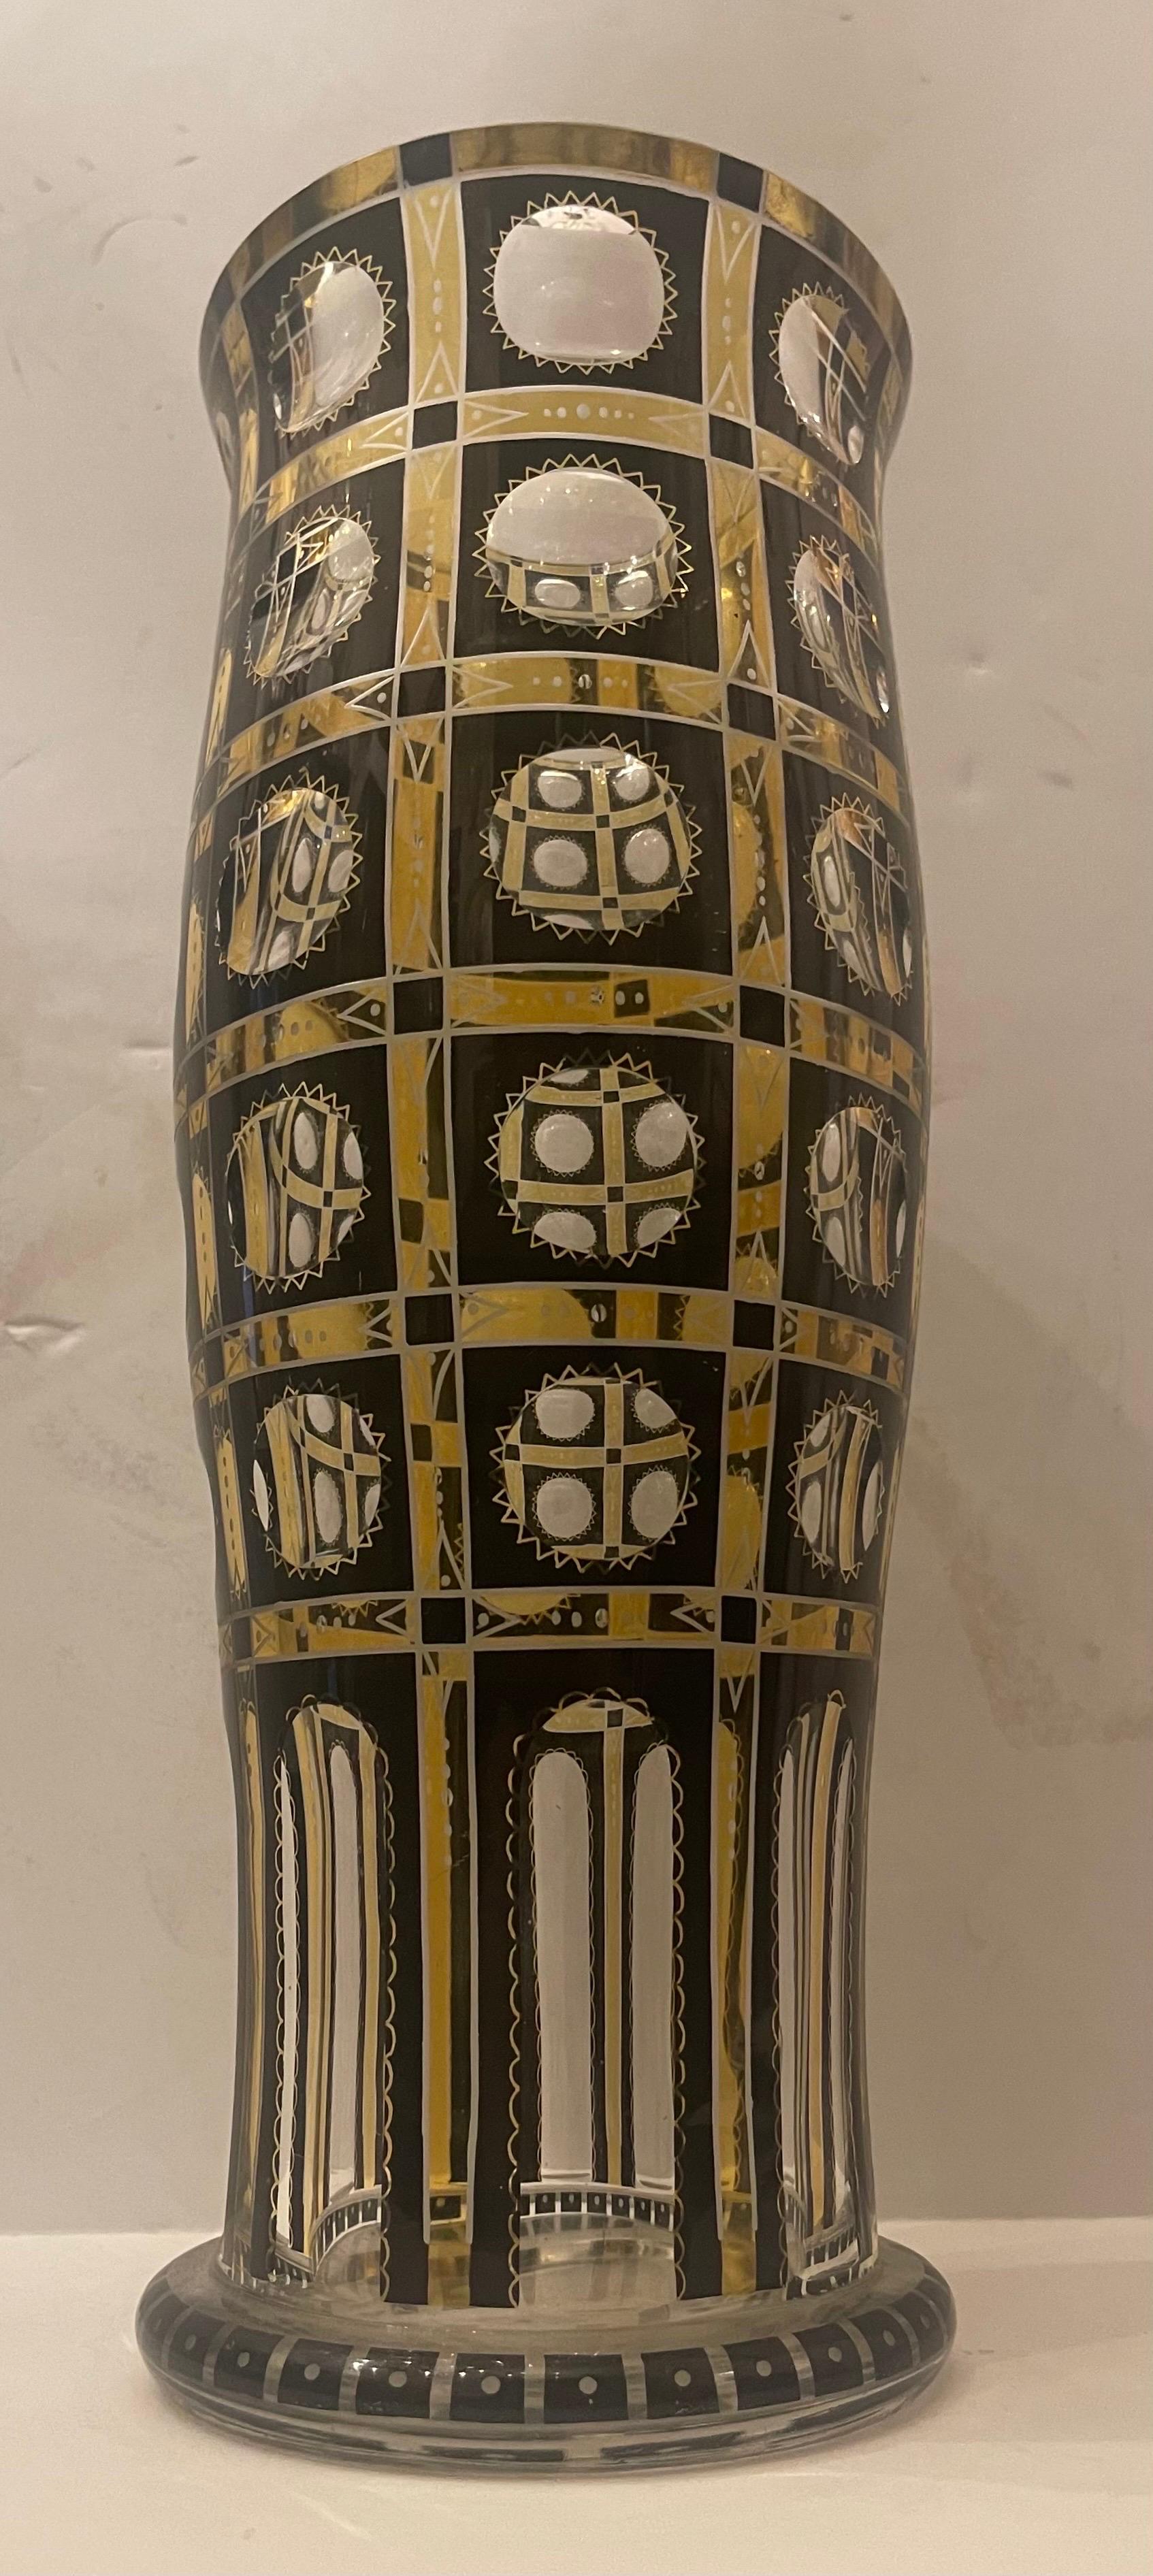 20th Century Wonderful Moser Art Glass Art Deco Enameled Yellow Black Etched Crystal Vase For Sale